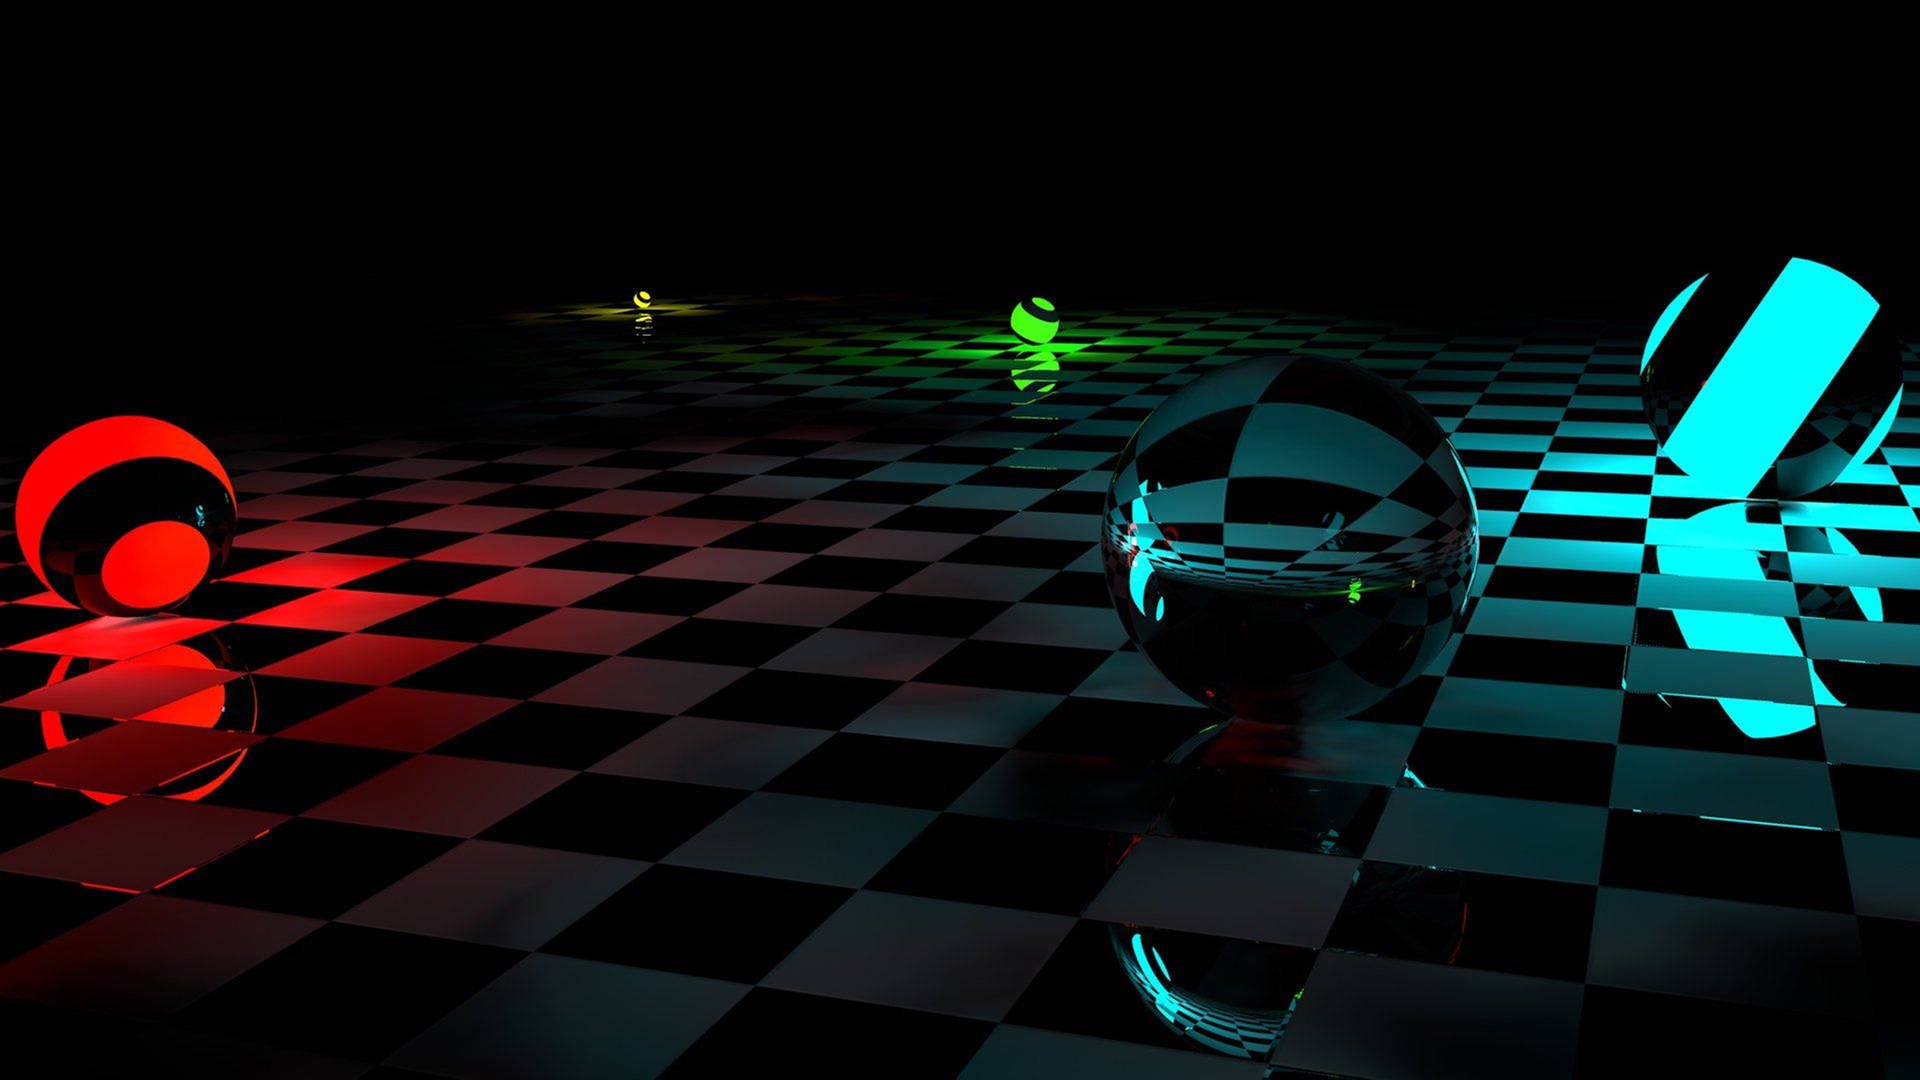 3d Hd Speres On Checkers Wallpaper